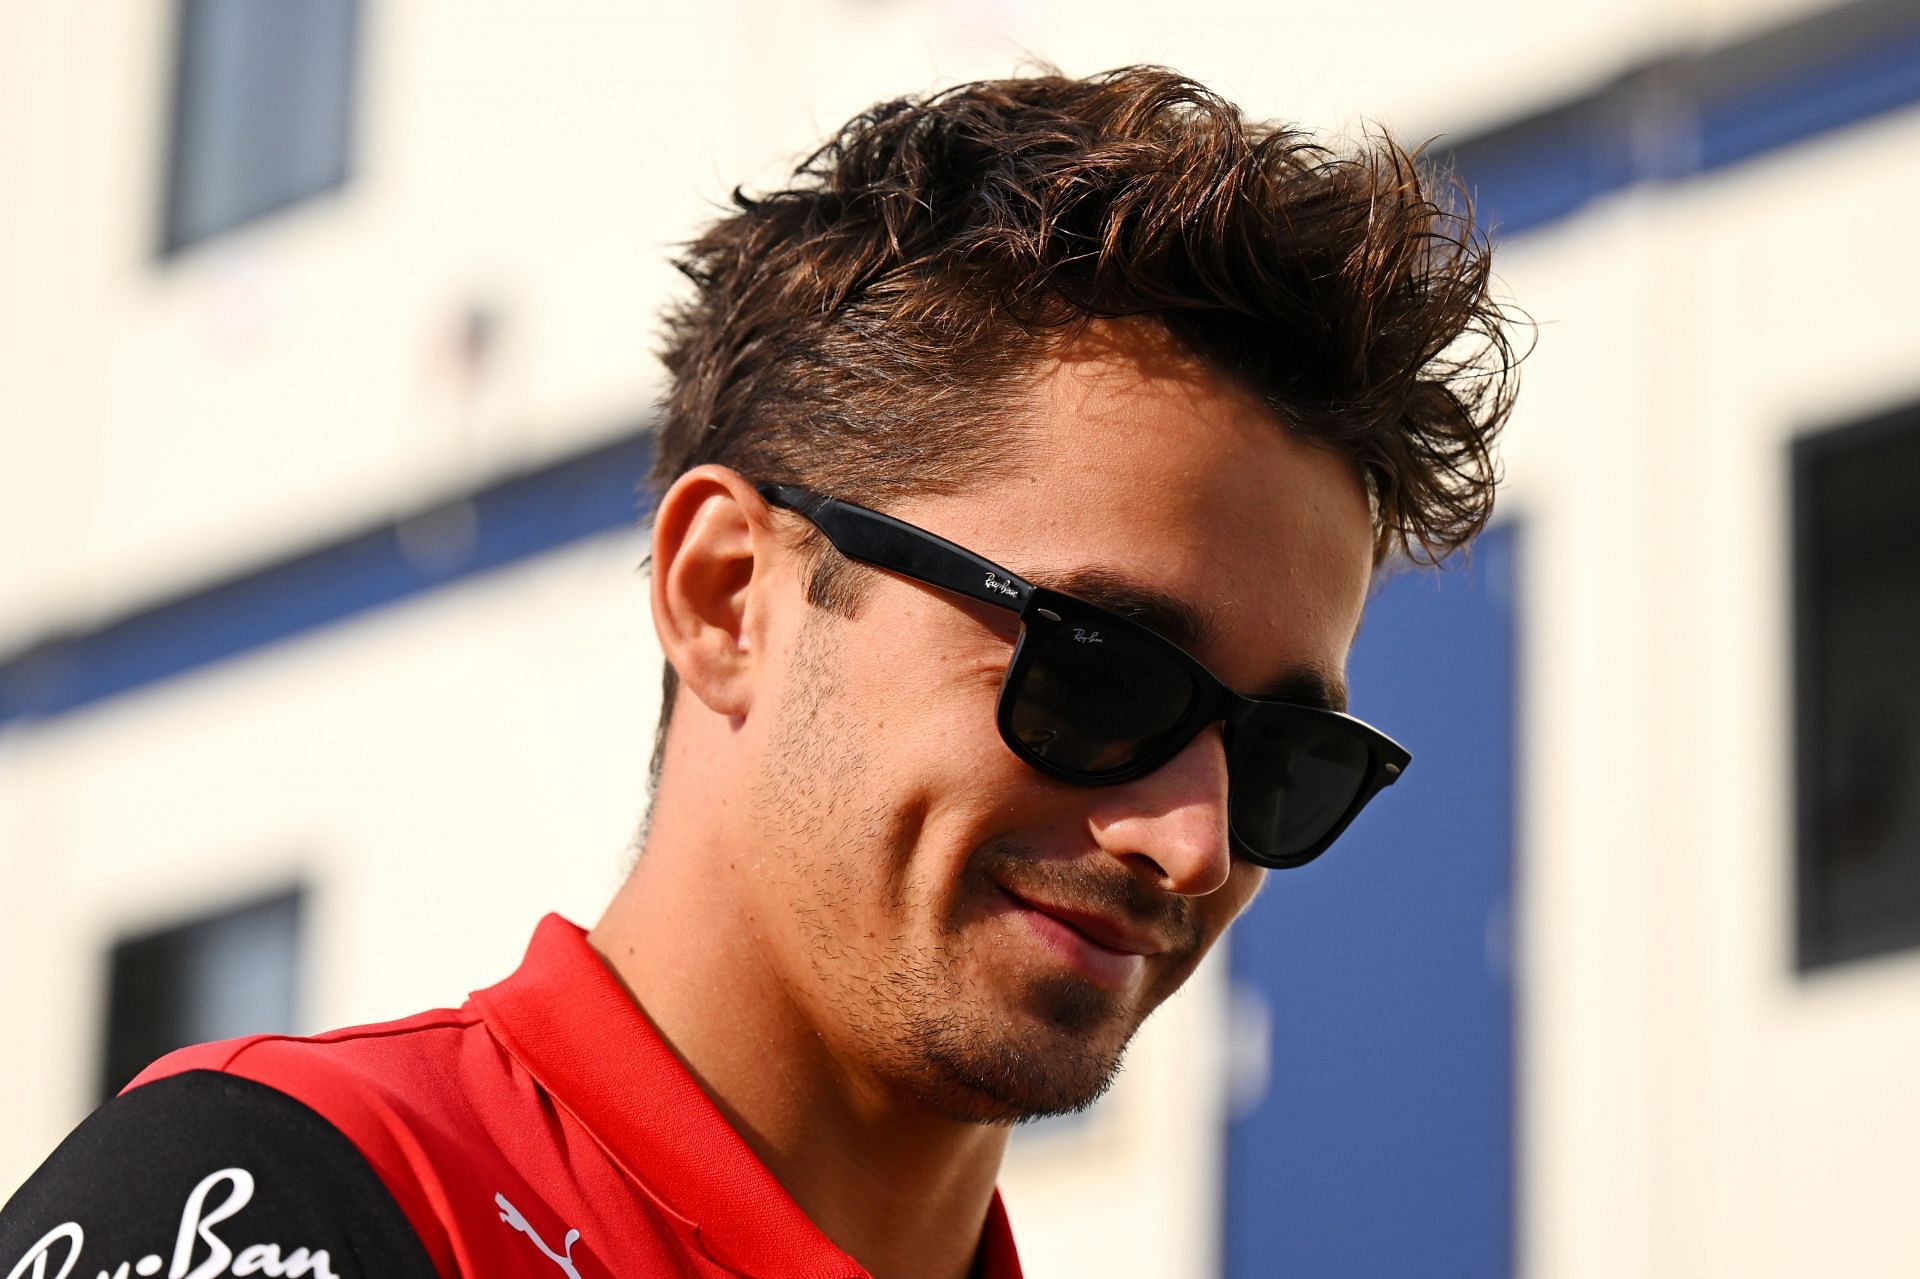 Charles Leclerc of Monaco and Ferrari arrives at the circuit and walks in the Paddock prior to practice ahead of the F1 Grand Prix of The Netherlands at Circuit Zandvoort (Photo by Clive Mason/Getty Images)